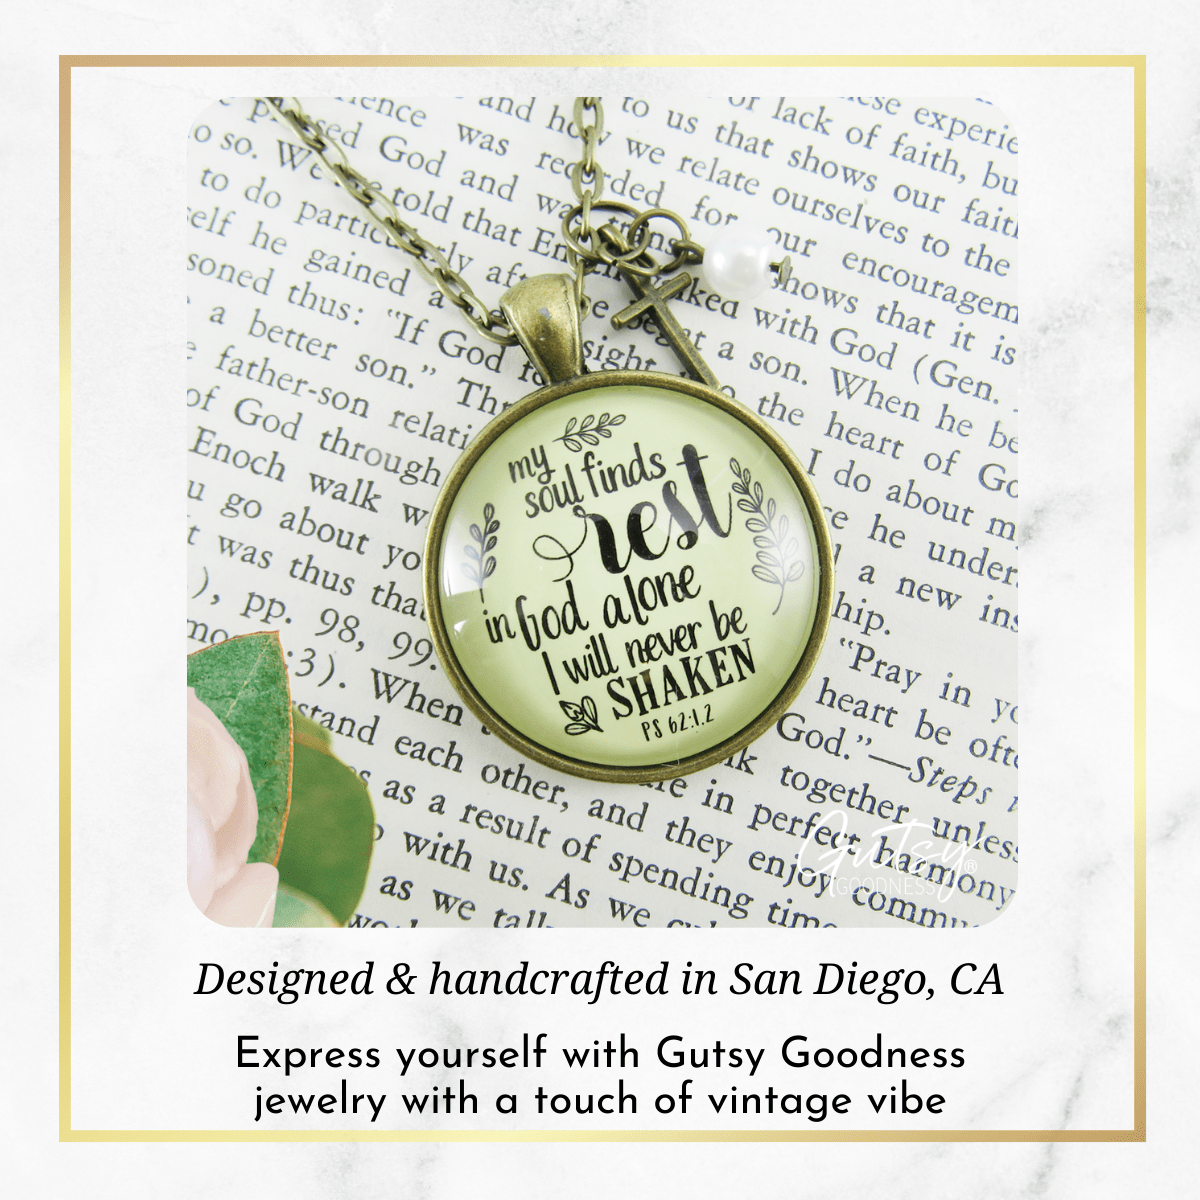 Gutsy Goodness Faith Necklace My Soul Finds Rest God Bible Saying Jewelry - Gutsy Goodness Handmade Jewelry;Faith Necklace My Soul Finds Rest God Bible Saying Jewelry - Gutsy Goodness Handmade Jewelry Gifts